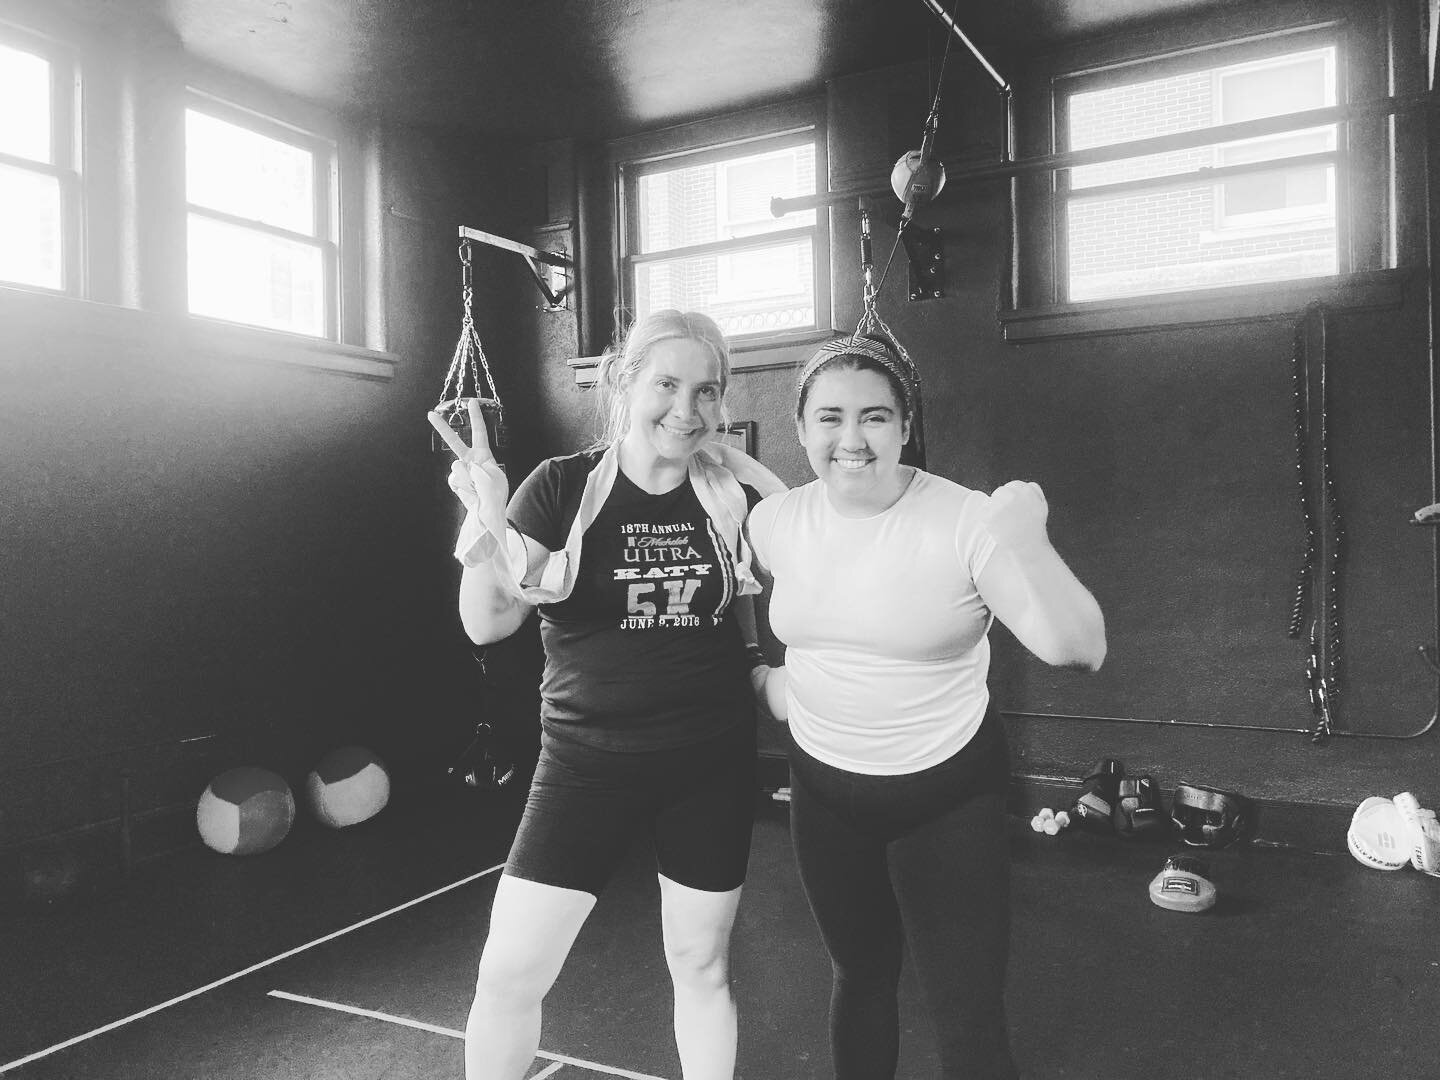 These two ladies have been training 3 times a week for over a month! Today they accomplished an 8 round fighting challenge and ended it on their feet still breathing! Very proud. 
&mdash;&mdash;
Also on another note&hellip;please know we will be inco